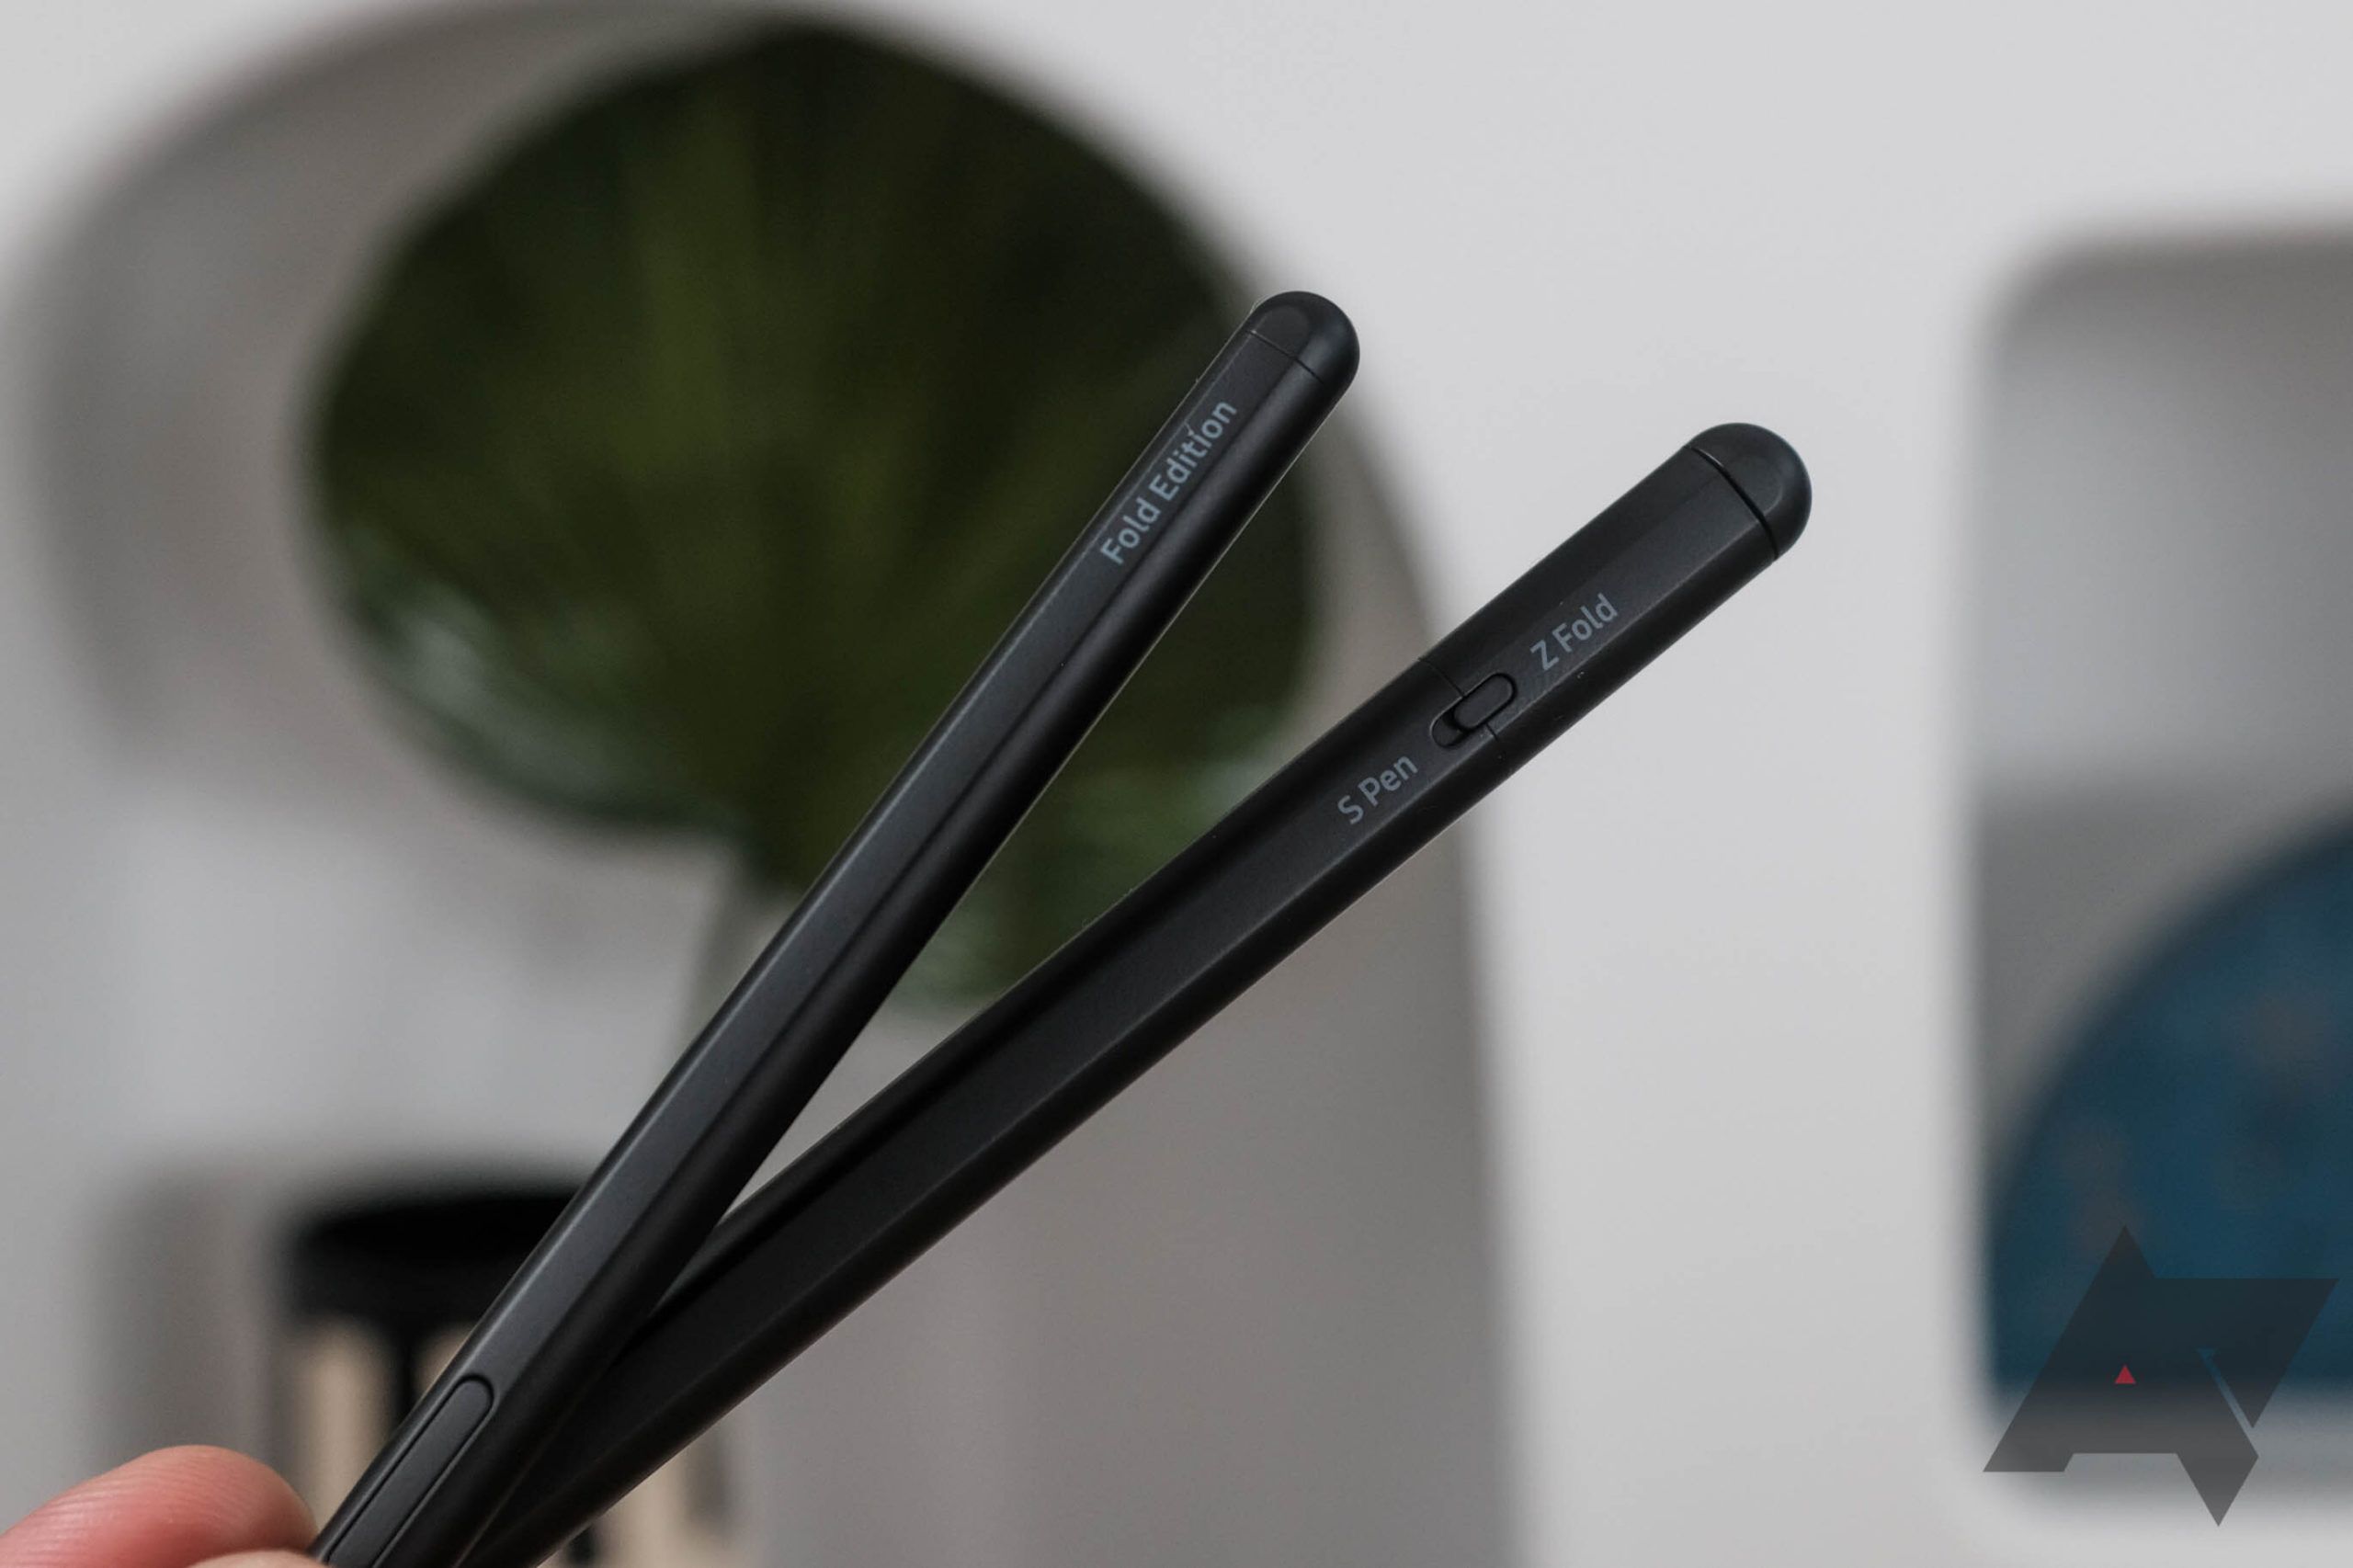 S Pen Fold Edition vs. S Pen Pro: What's the difference?